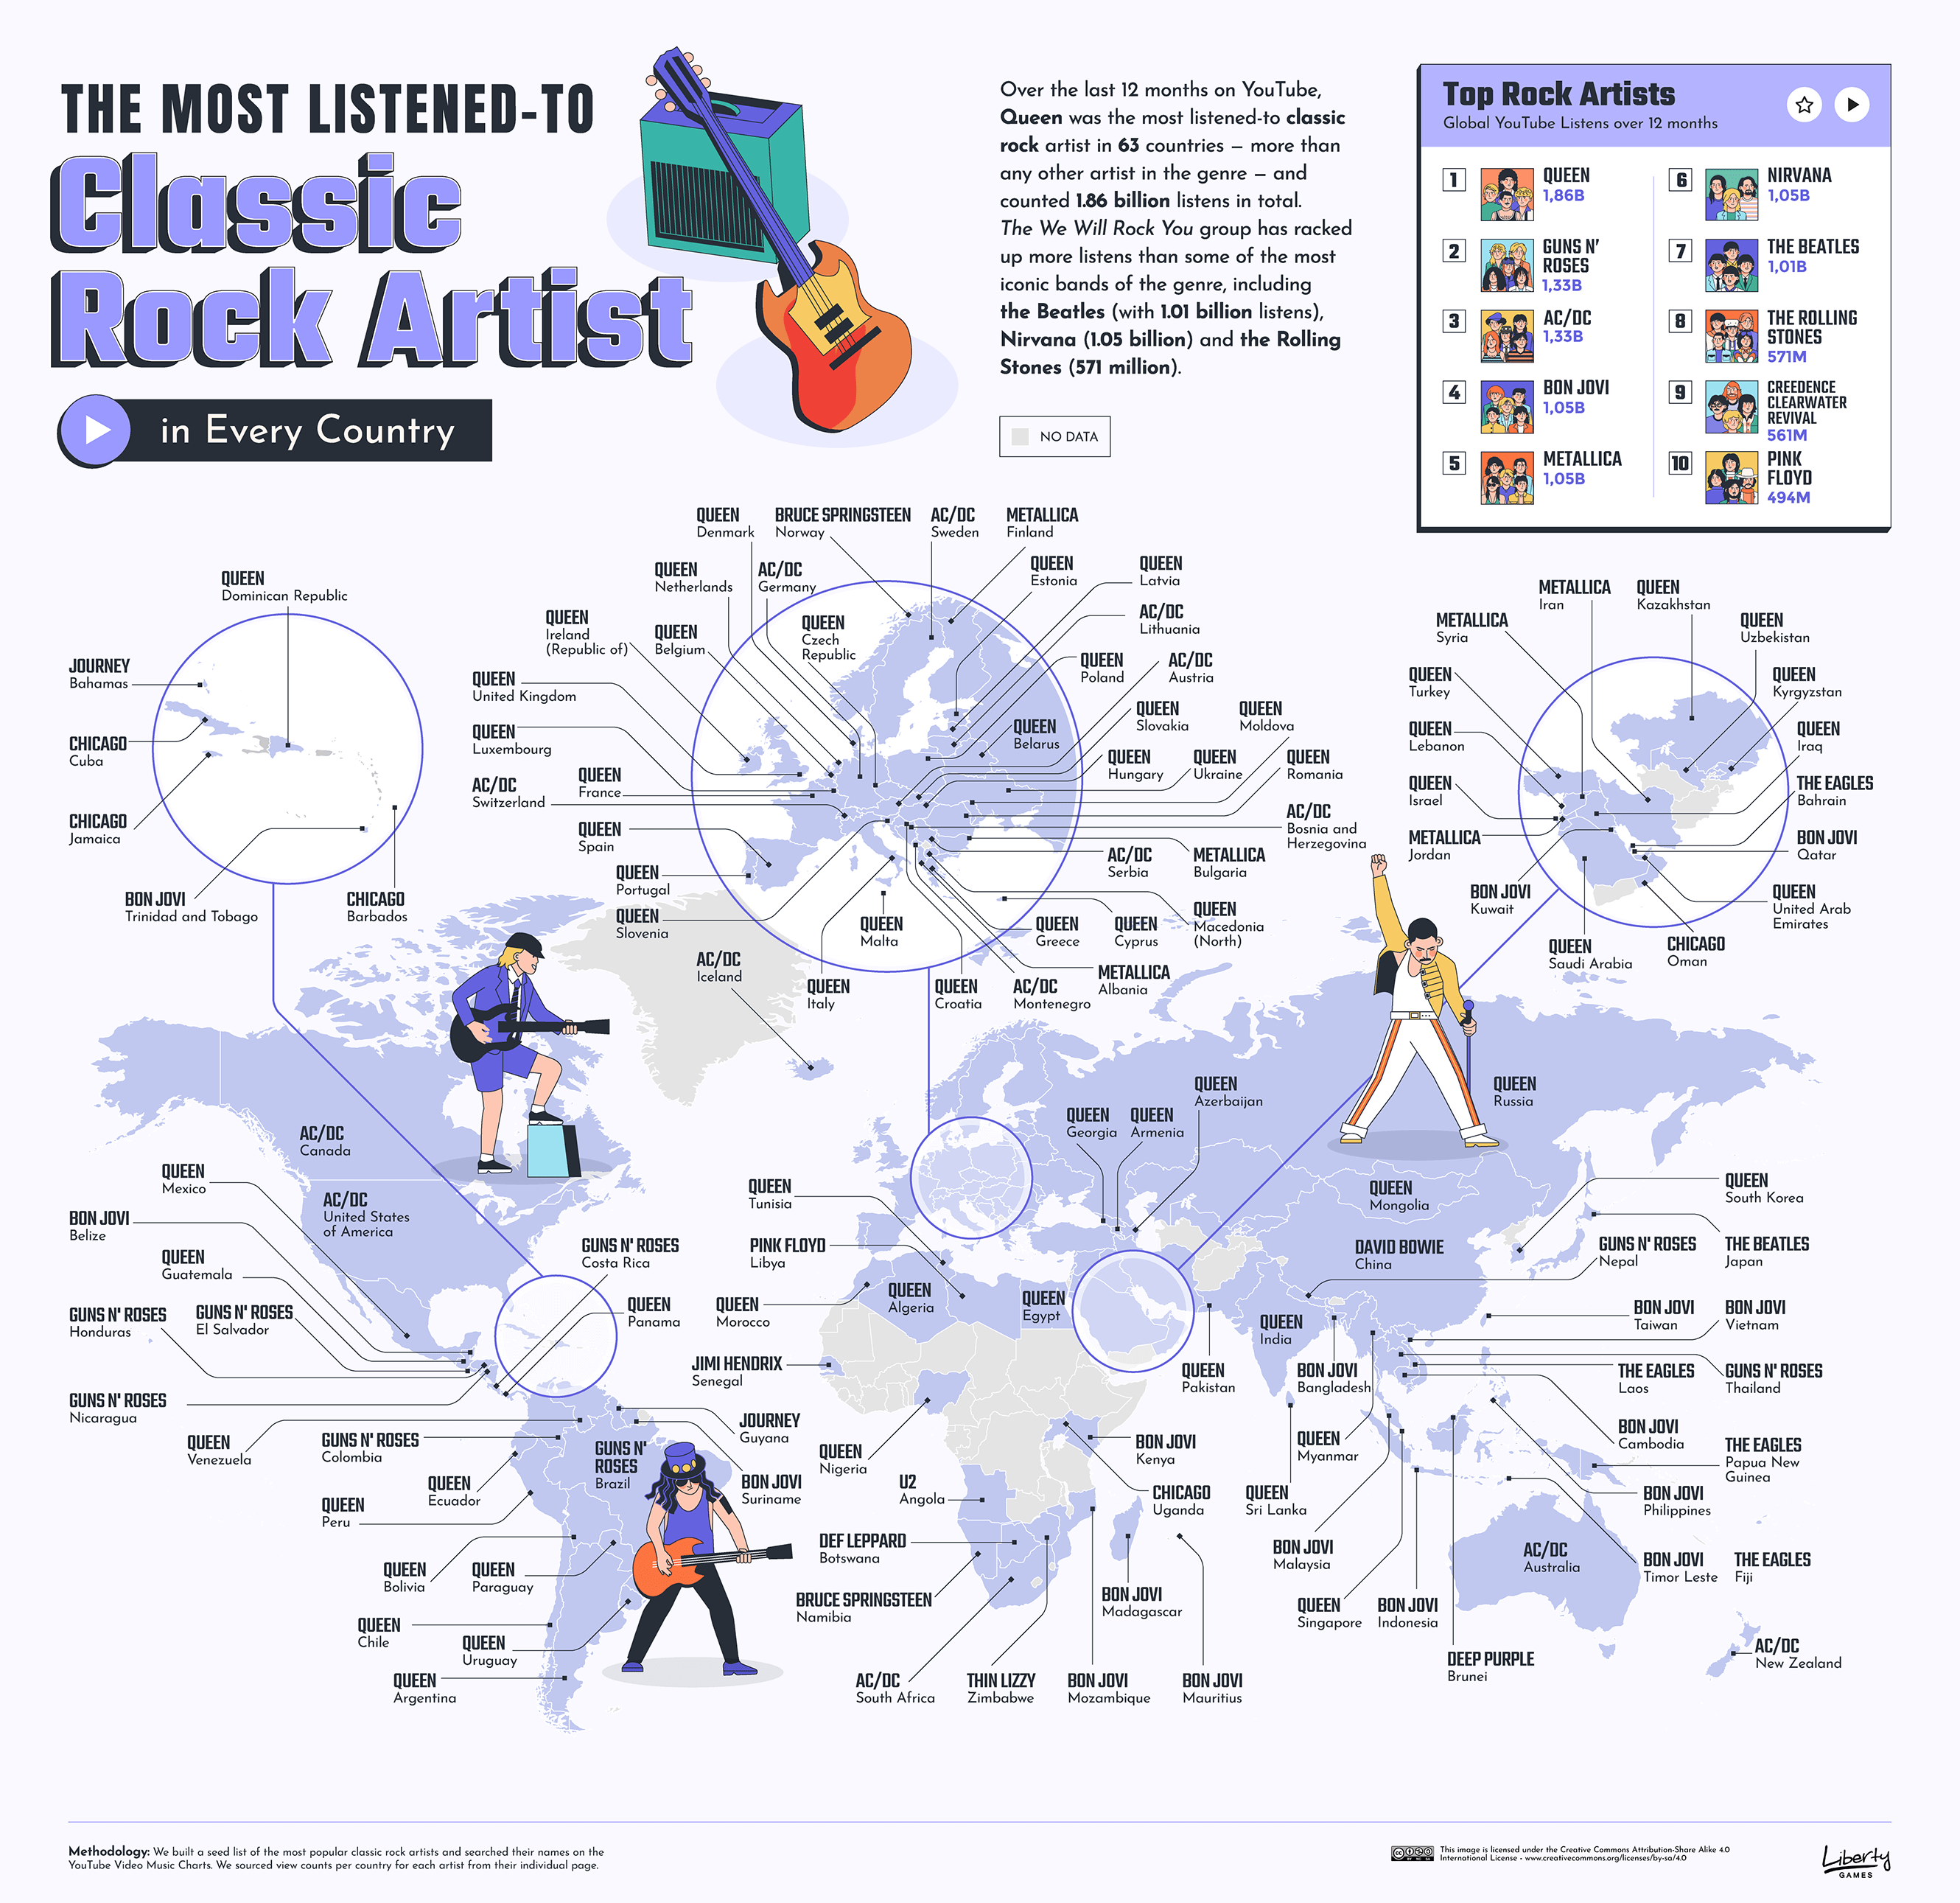 The most listened to rock artists in the world map